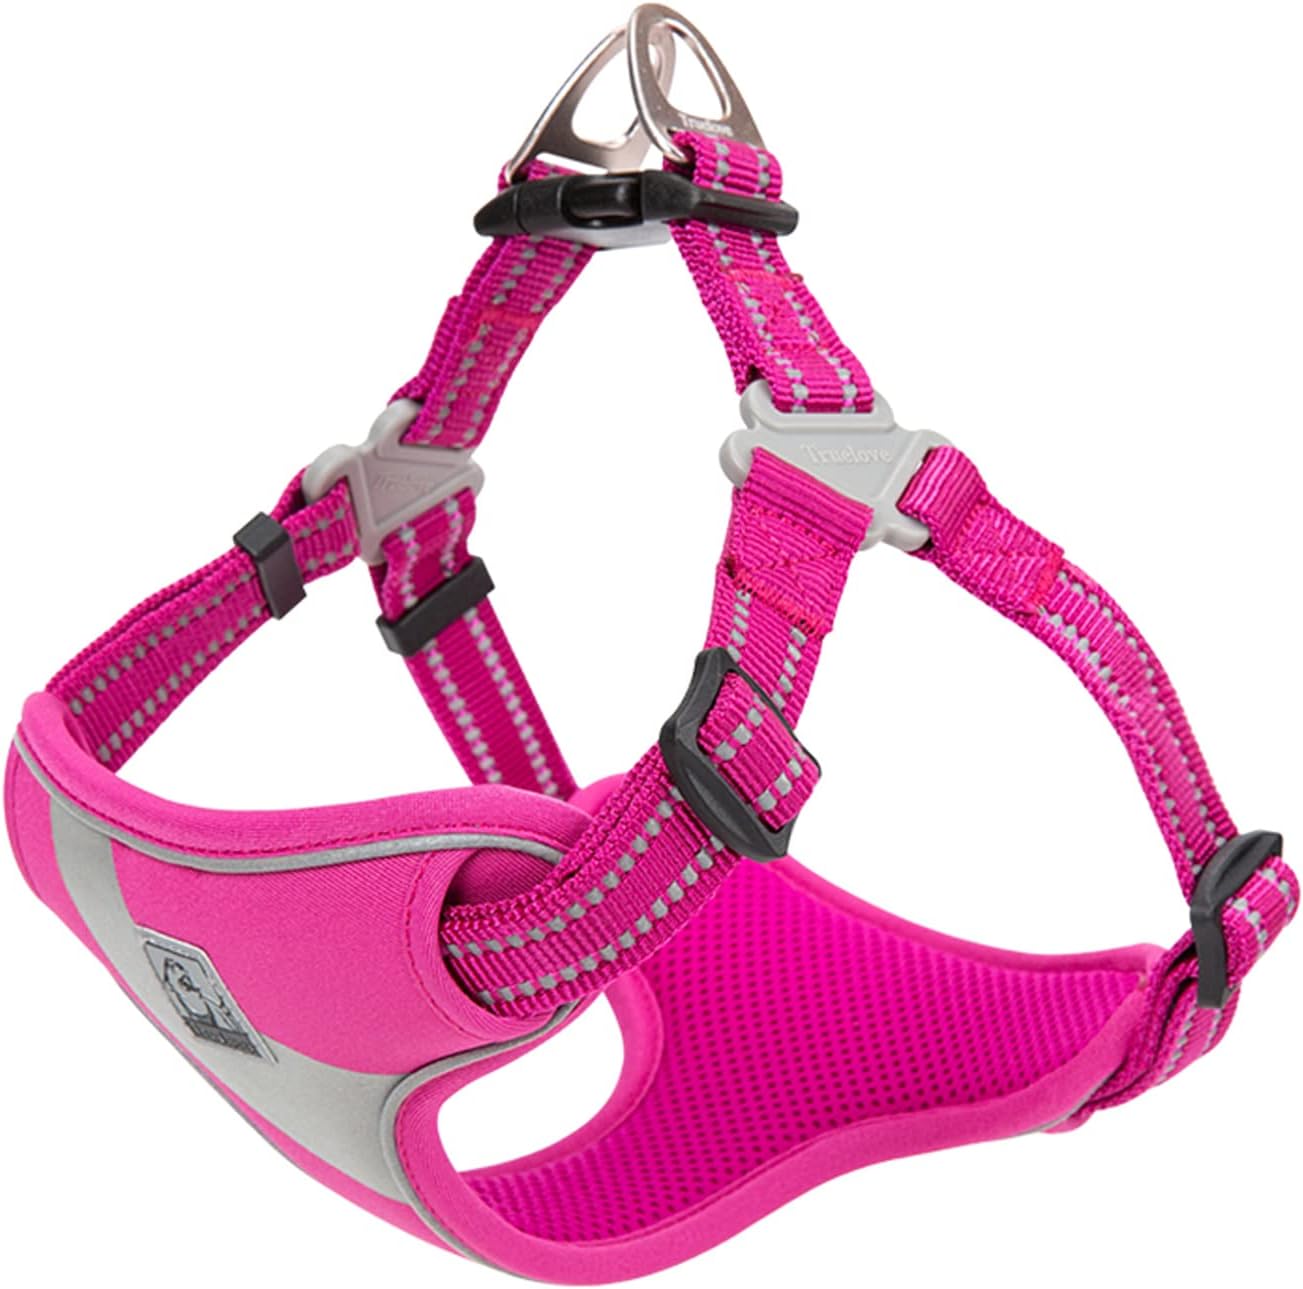 TRUE LOVE Dog Harness TLH5991 Anti Pull Safety Vest Step-in Style Harness for More Comfort and Less Tug Reflective Pet Harness by Truelove